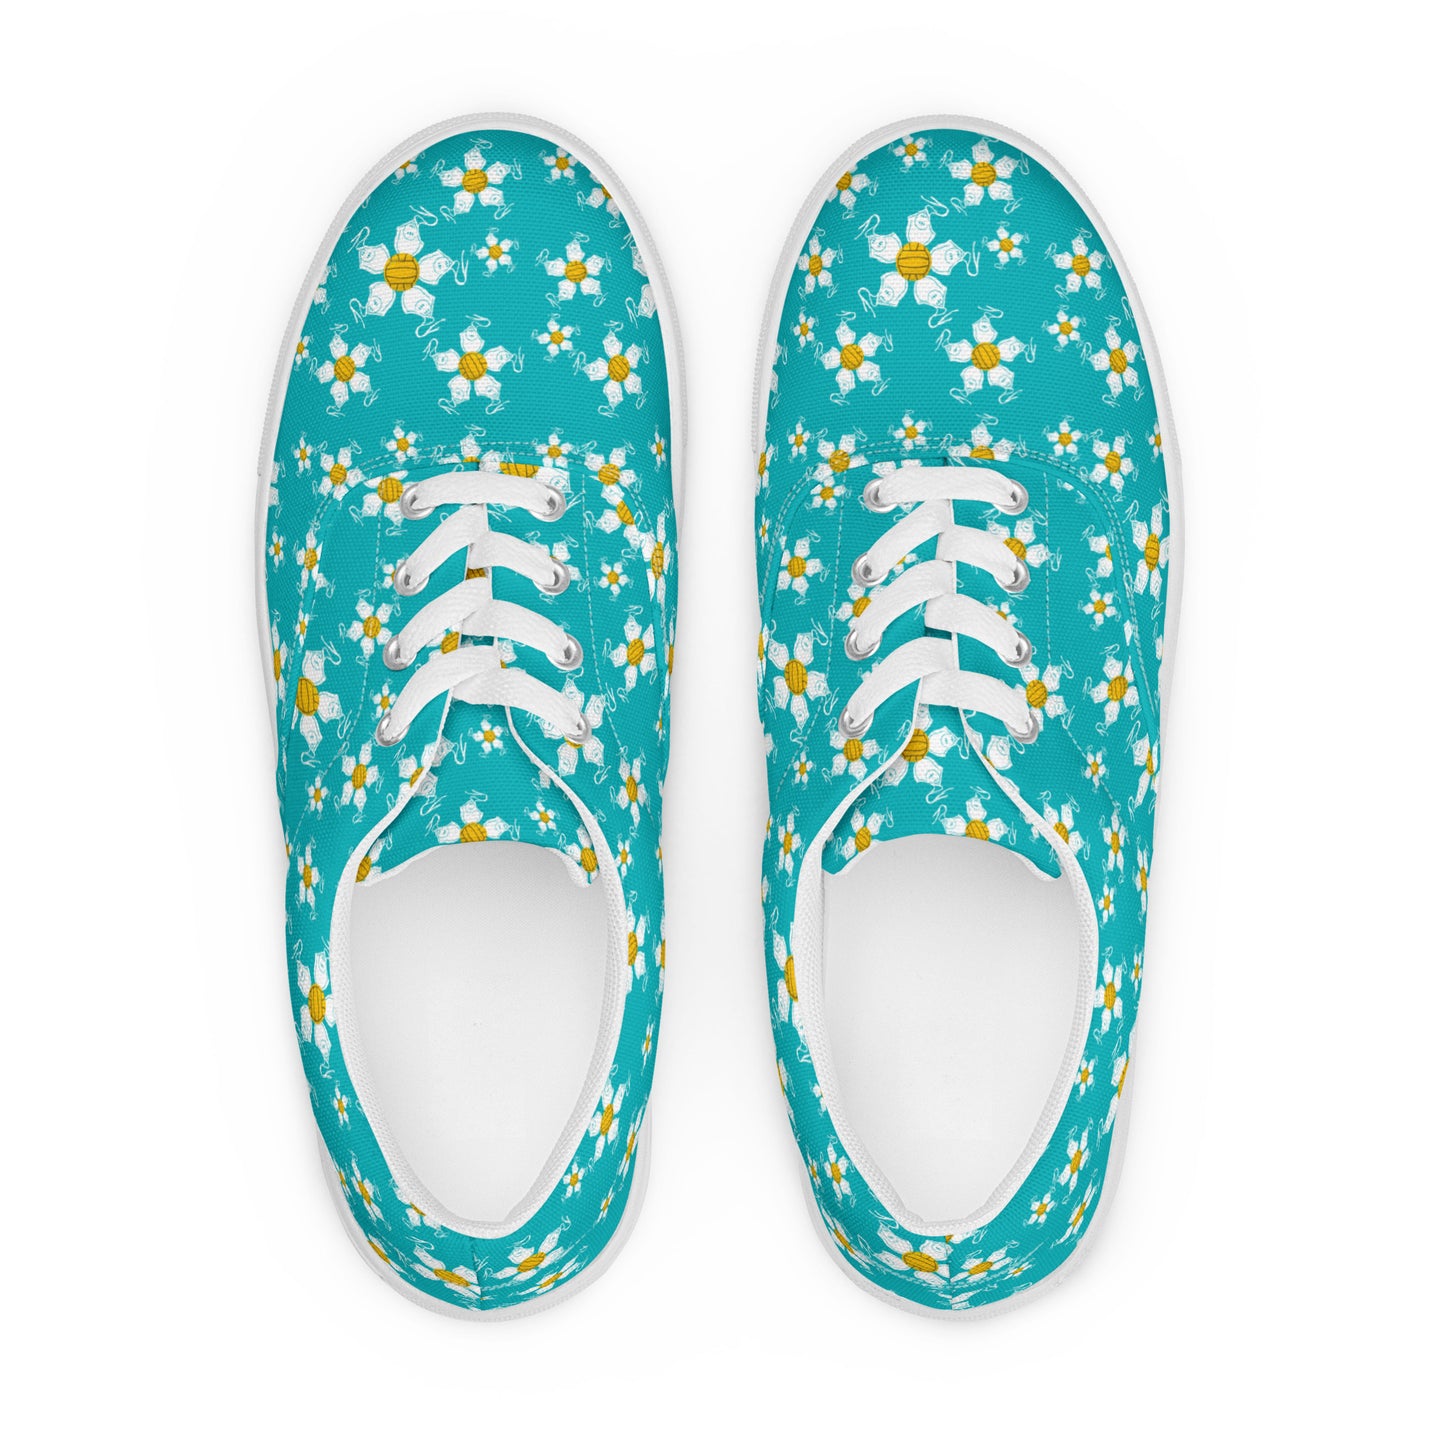 Water Polo Floral Women’s lace-up canvas shoes